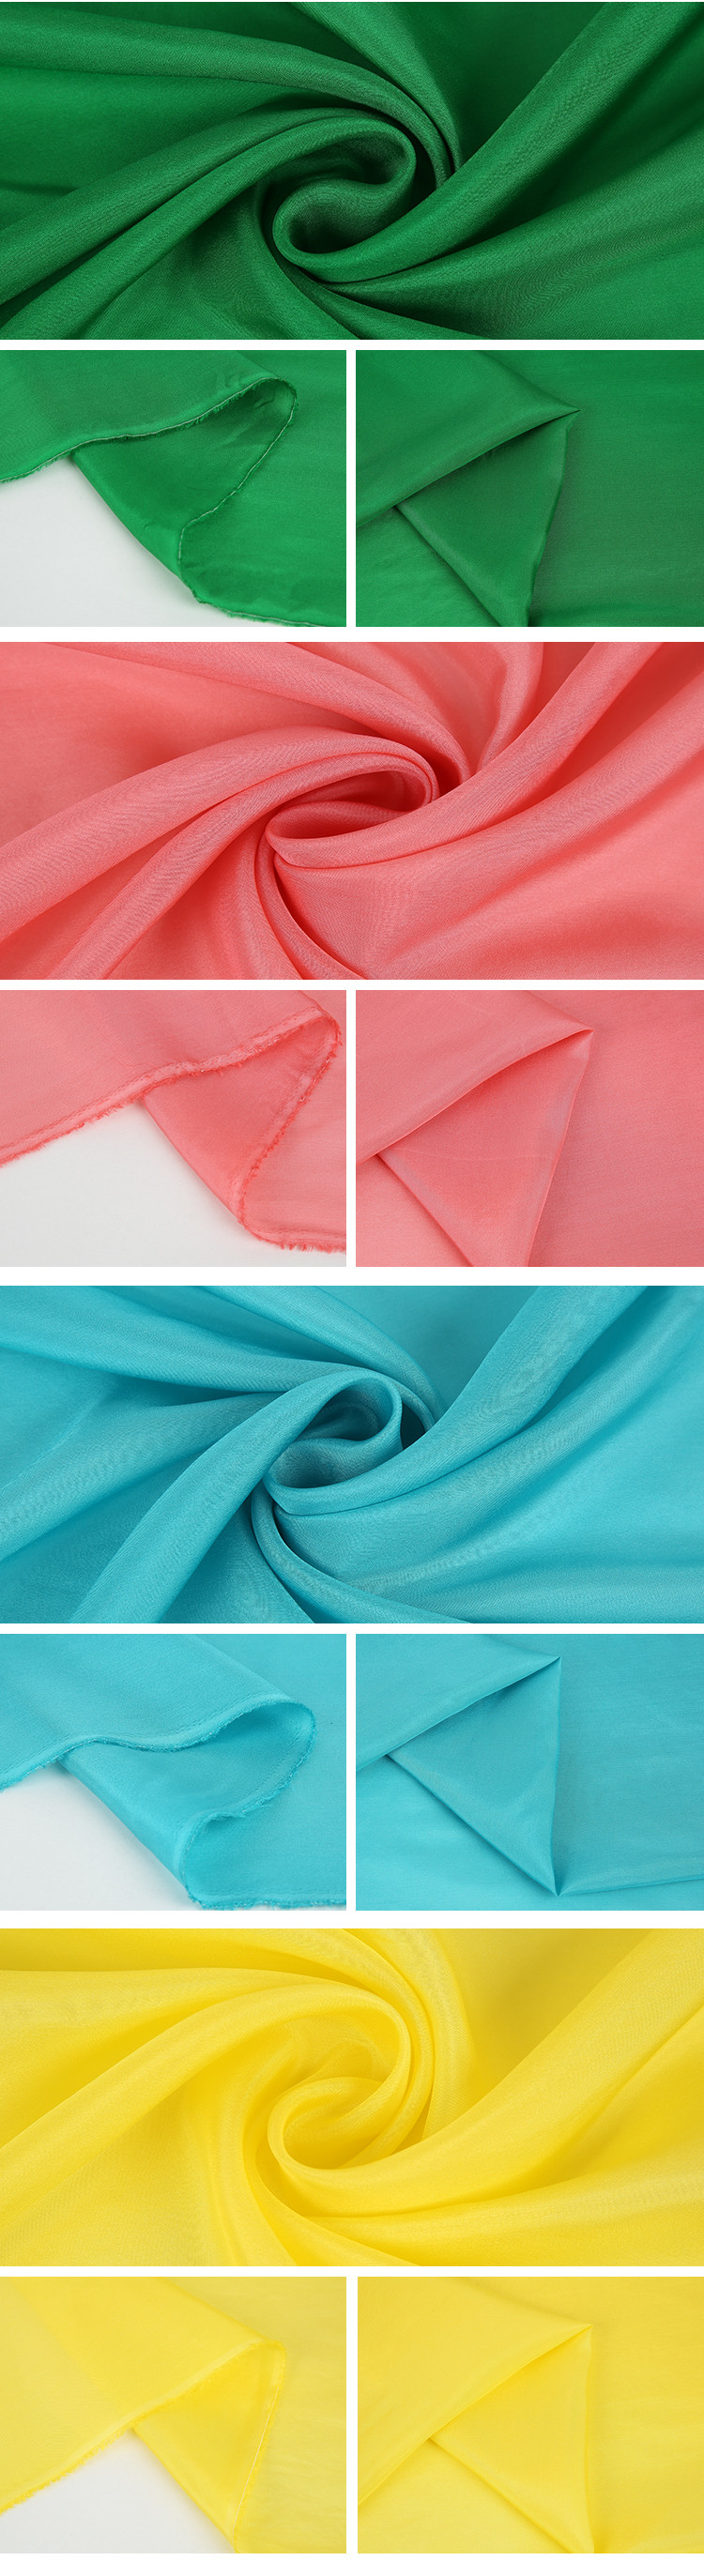 M1 8mm silk habotai 100% Pure Fabric Silk For Shirt And Scarves